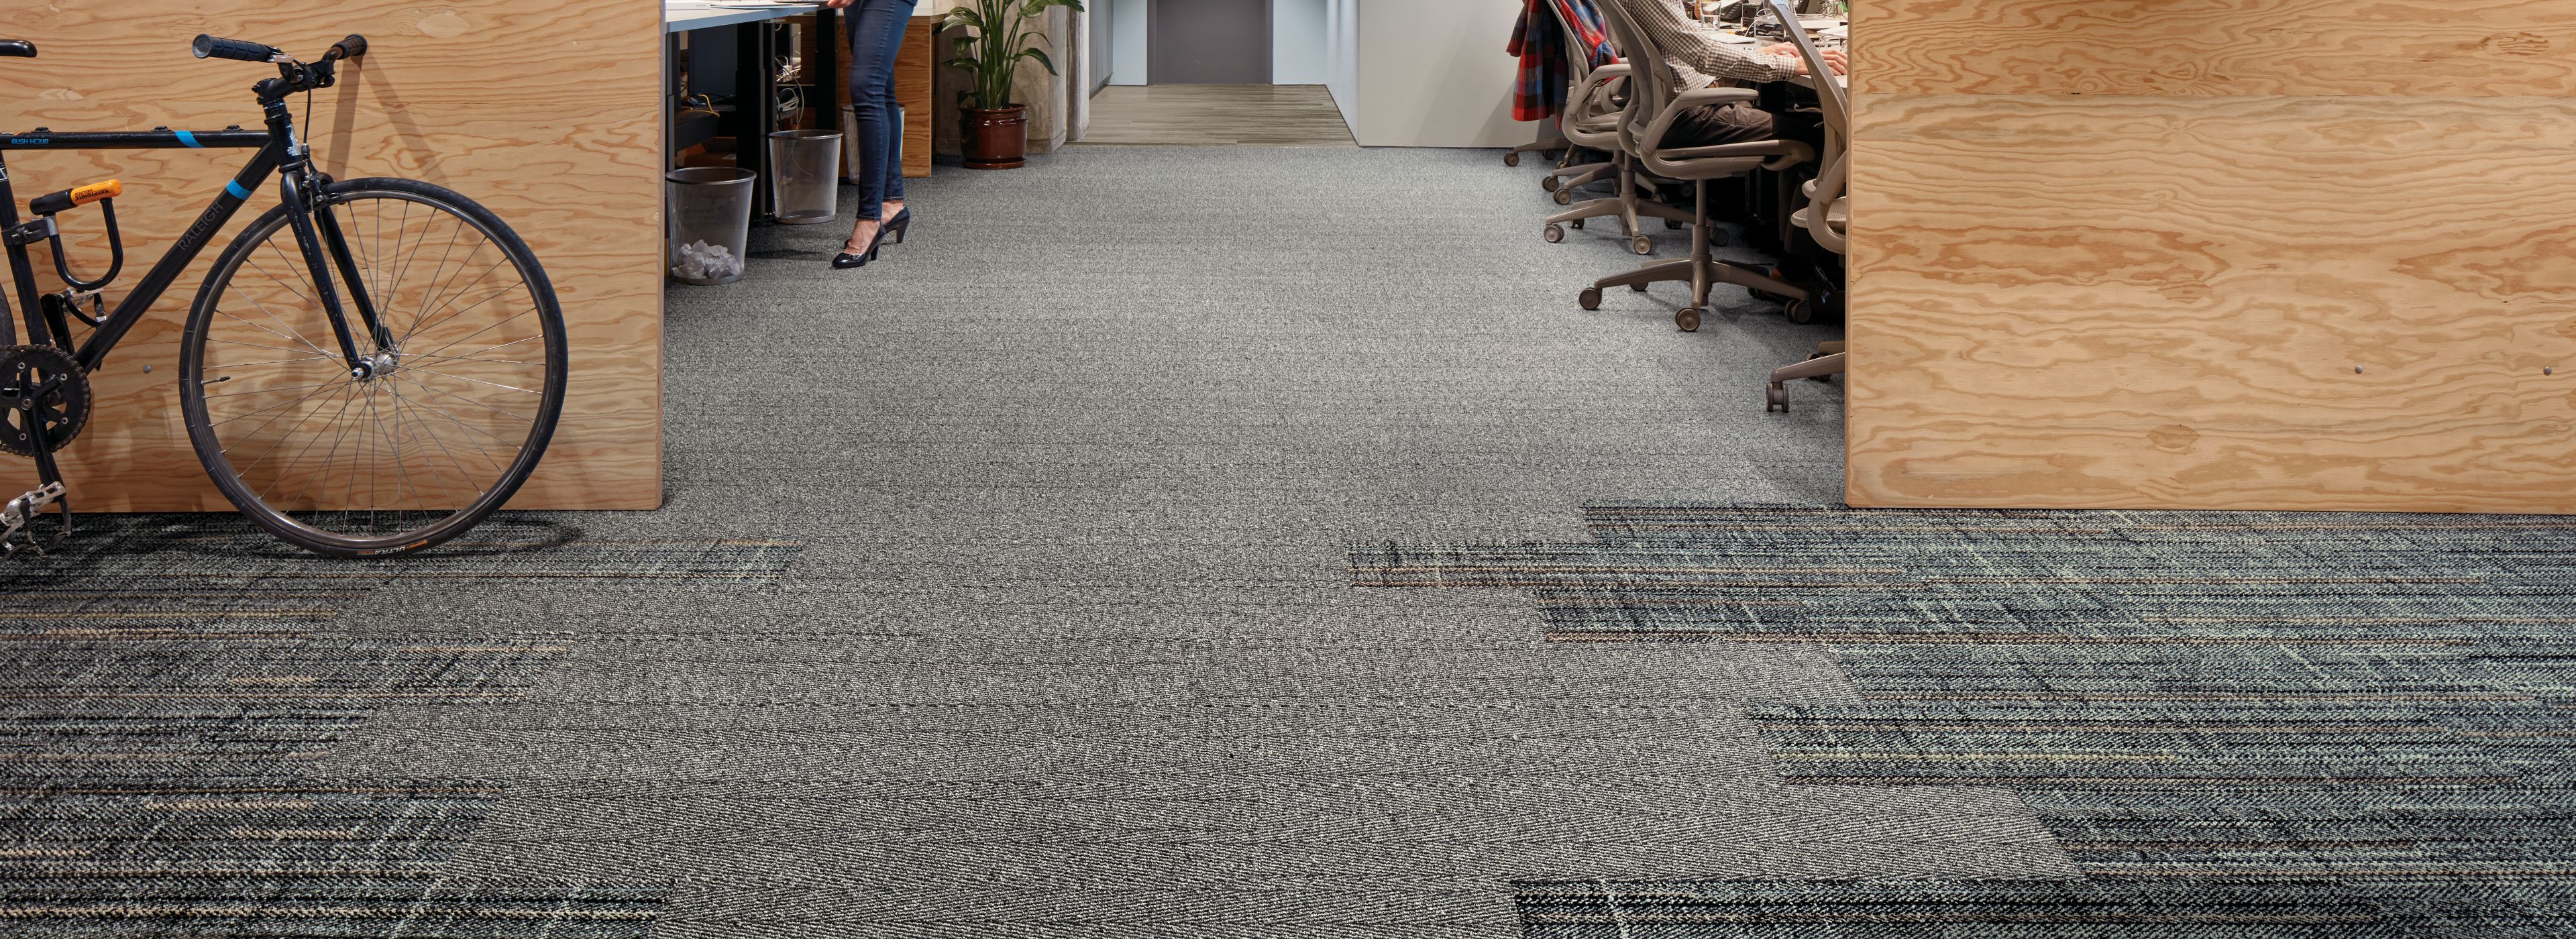 Interface French Seams and Stitch in Time plank carpet tile and Textured Woodgrains LVT with workstations image number 1